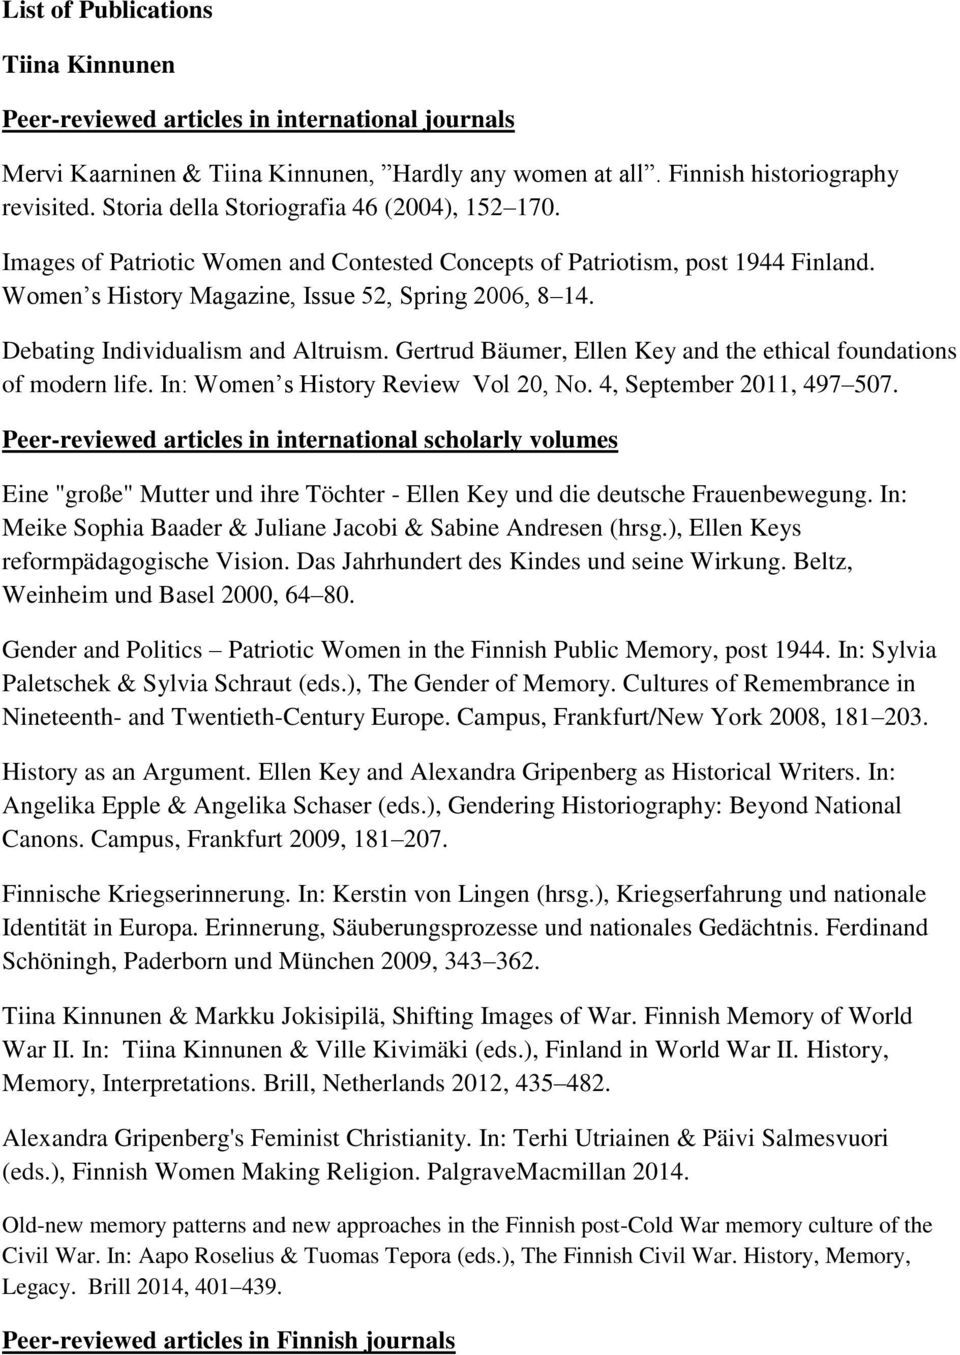 Debating Individualism and Altruism. Gertrud Bäumer, Ellen Key and the ethical foundations of modern life. In: Women s History Review Vol 20, No. 4, September 2011, 497 507.